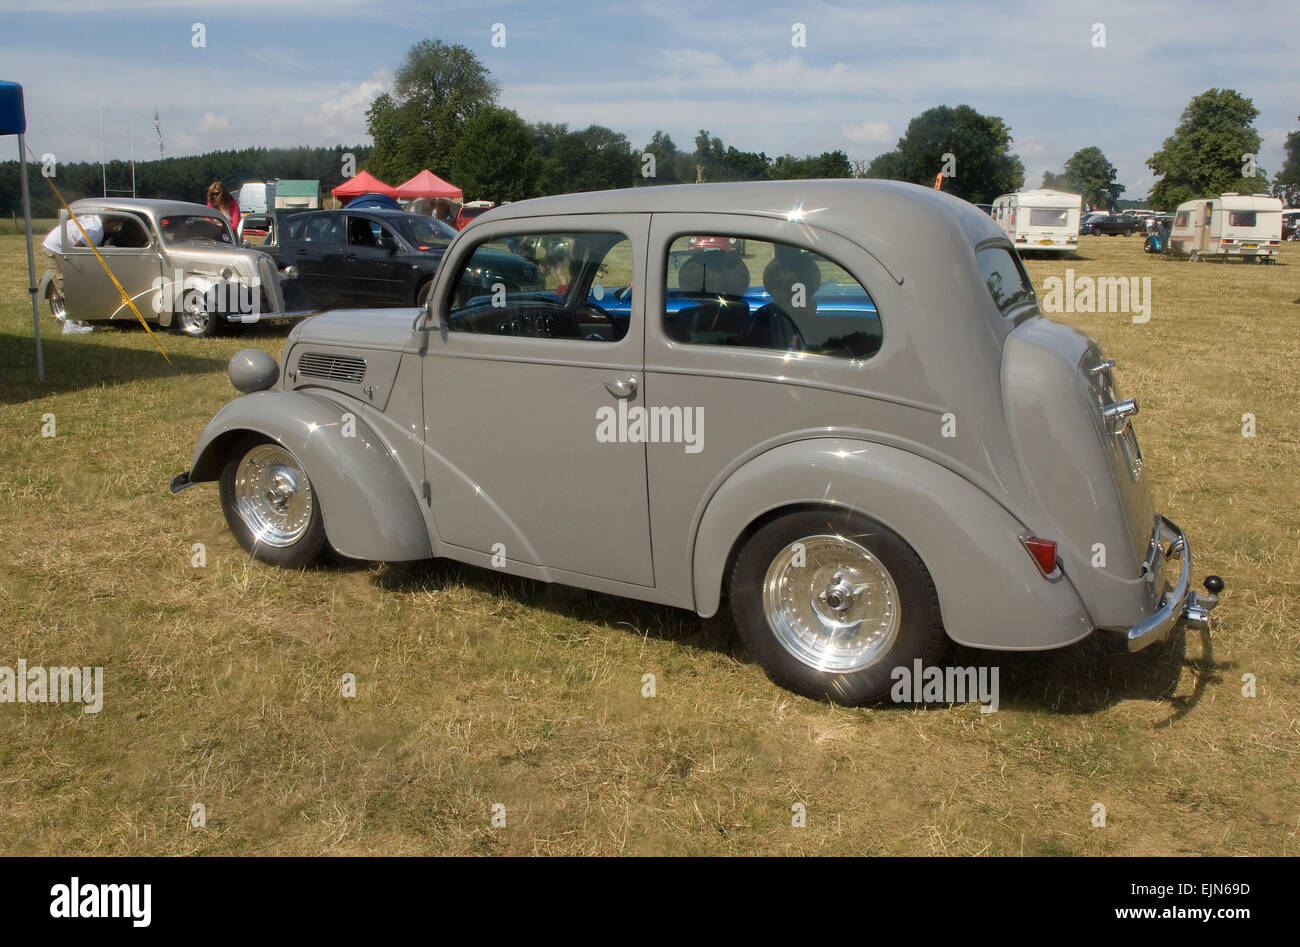 Ford Popular Hot Rod High Resolution Stock Photography and Images - Alamy